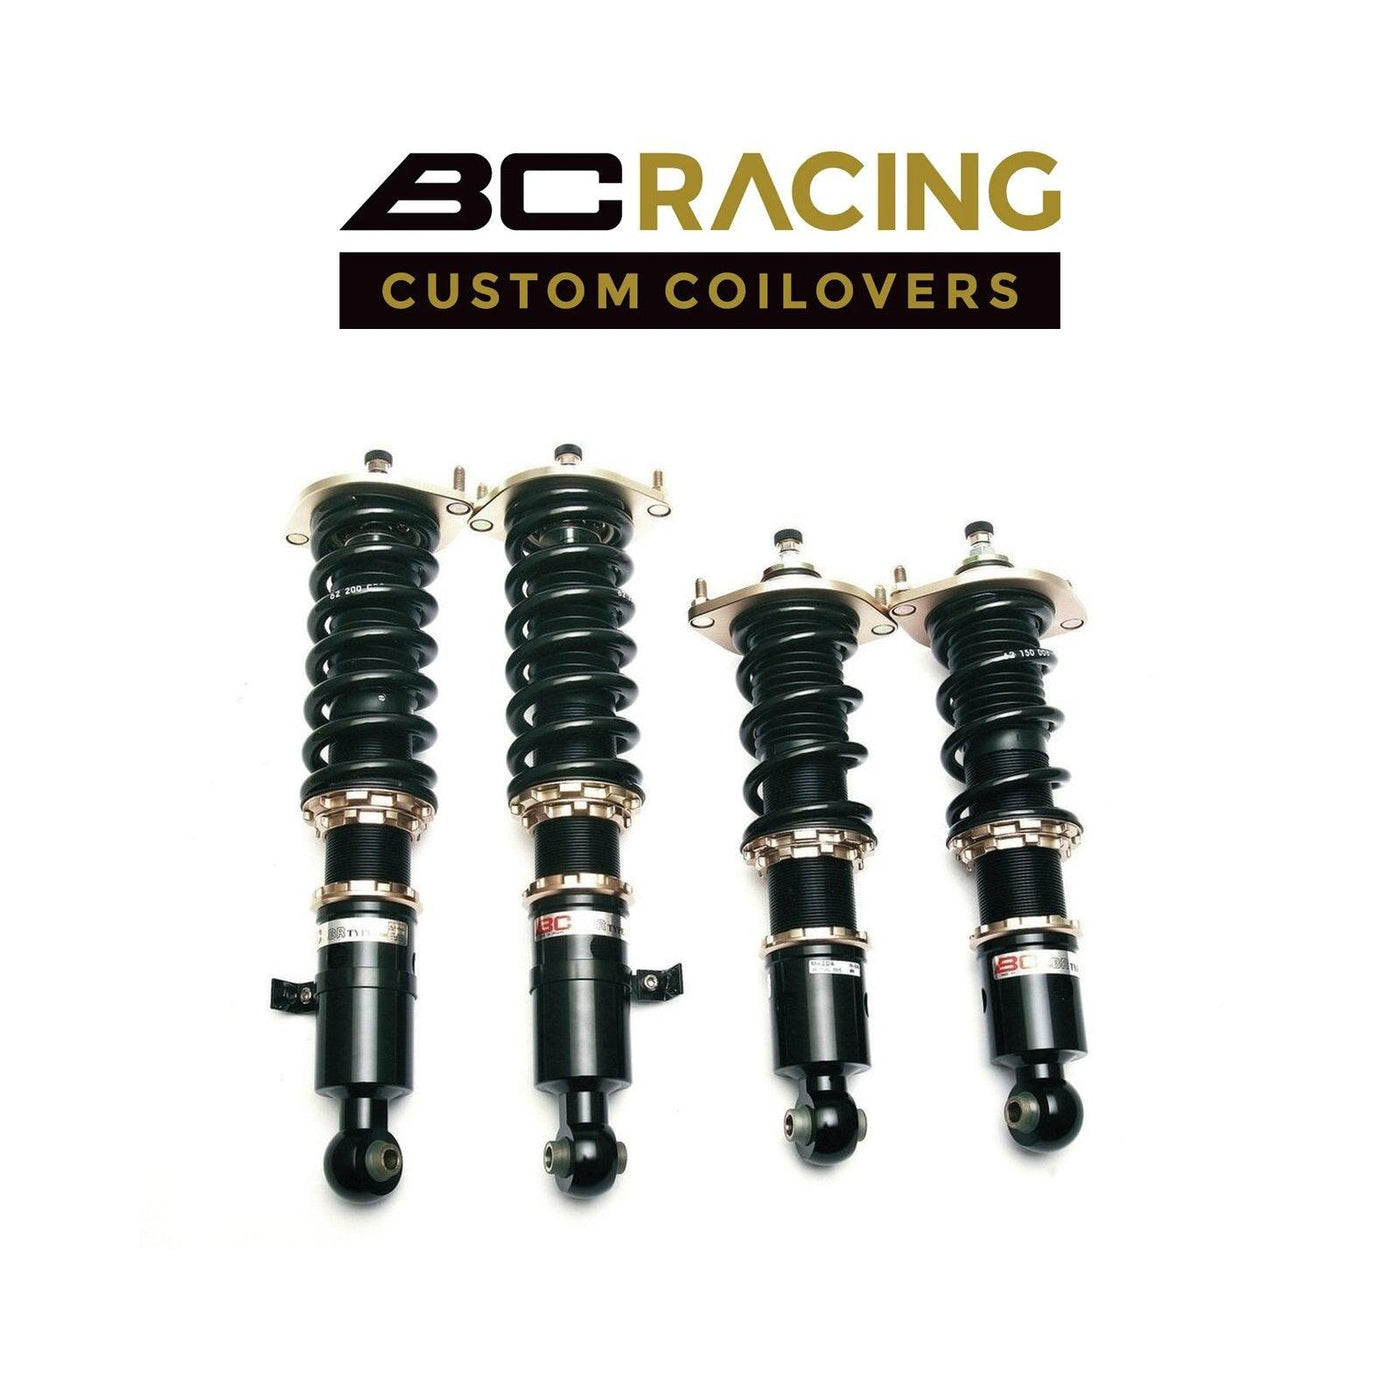 BC Racing Coilovers 2009-2015 CHEVROLET Cruze - Attacking the Clock Racing